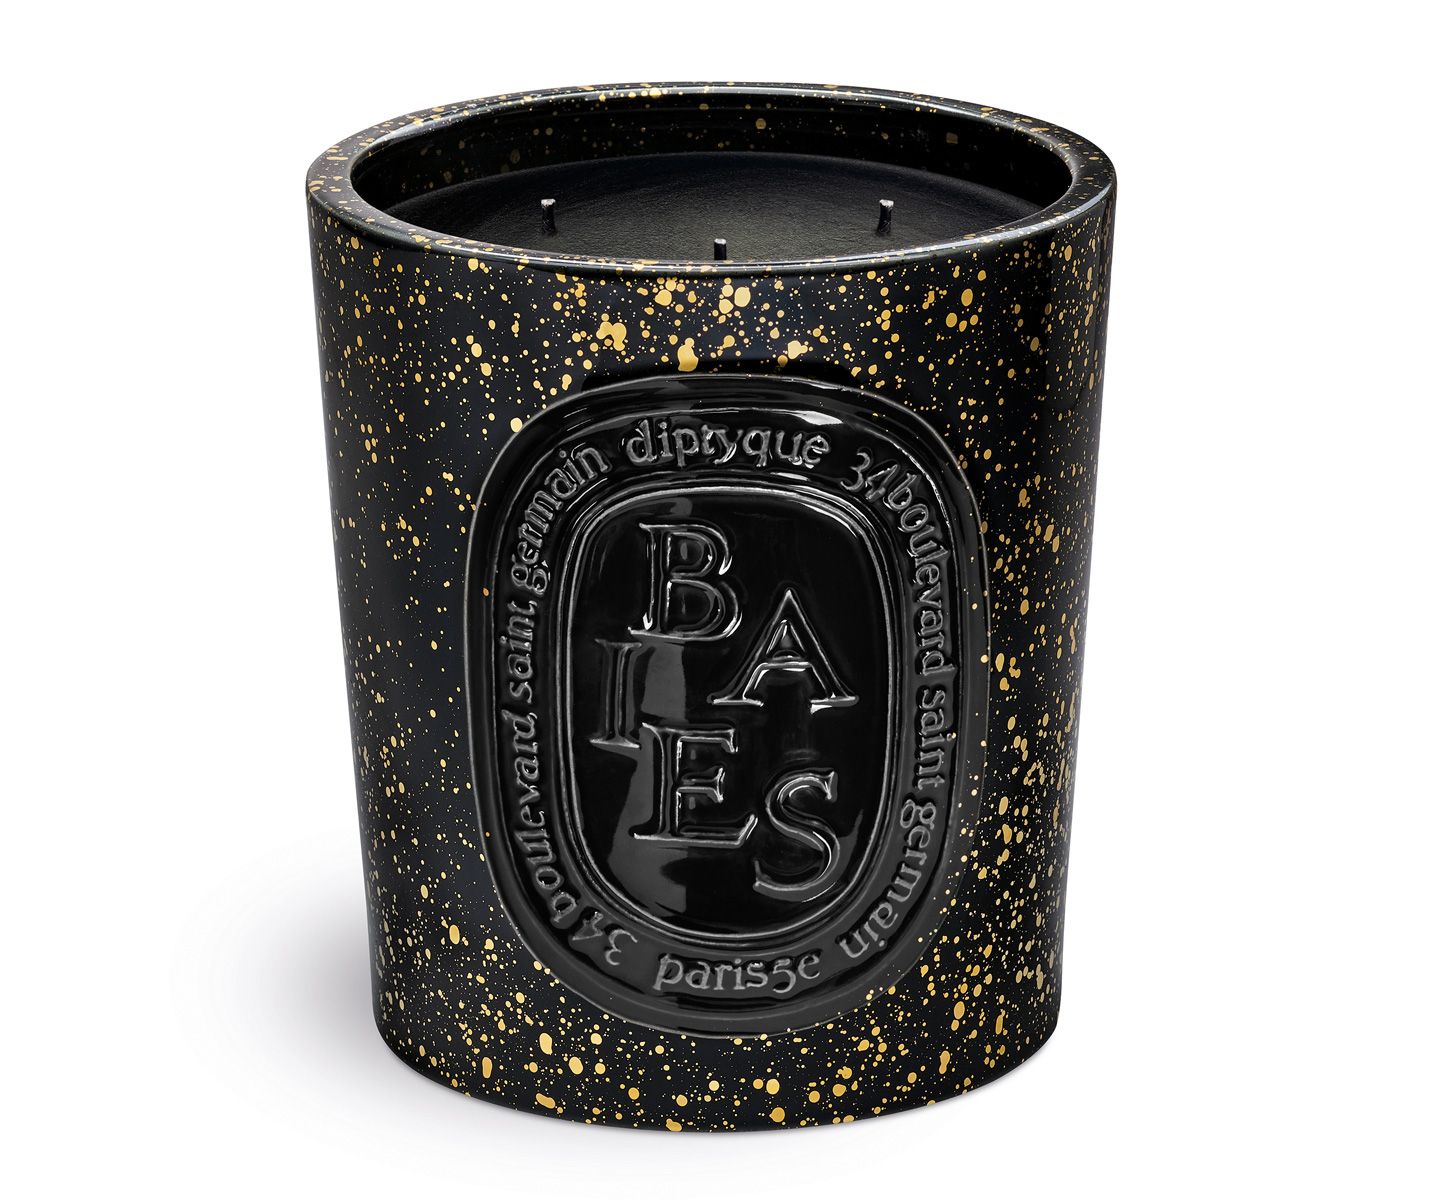 Baies / Berries candle 1.5kg – Limited Edition | Diptyque (UK)